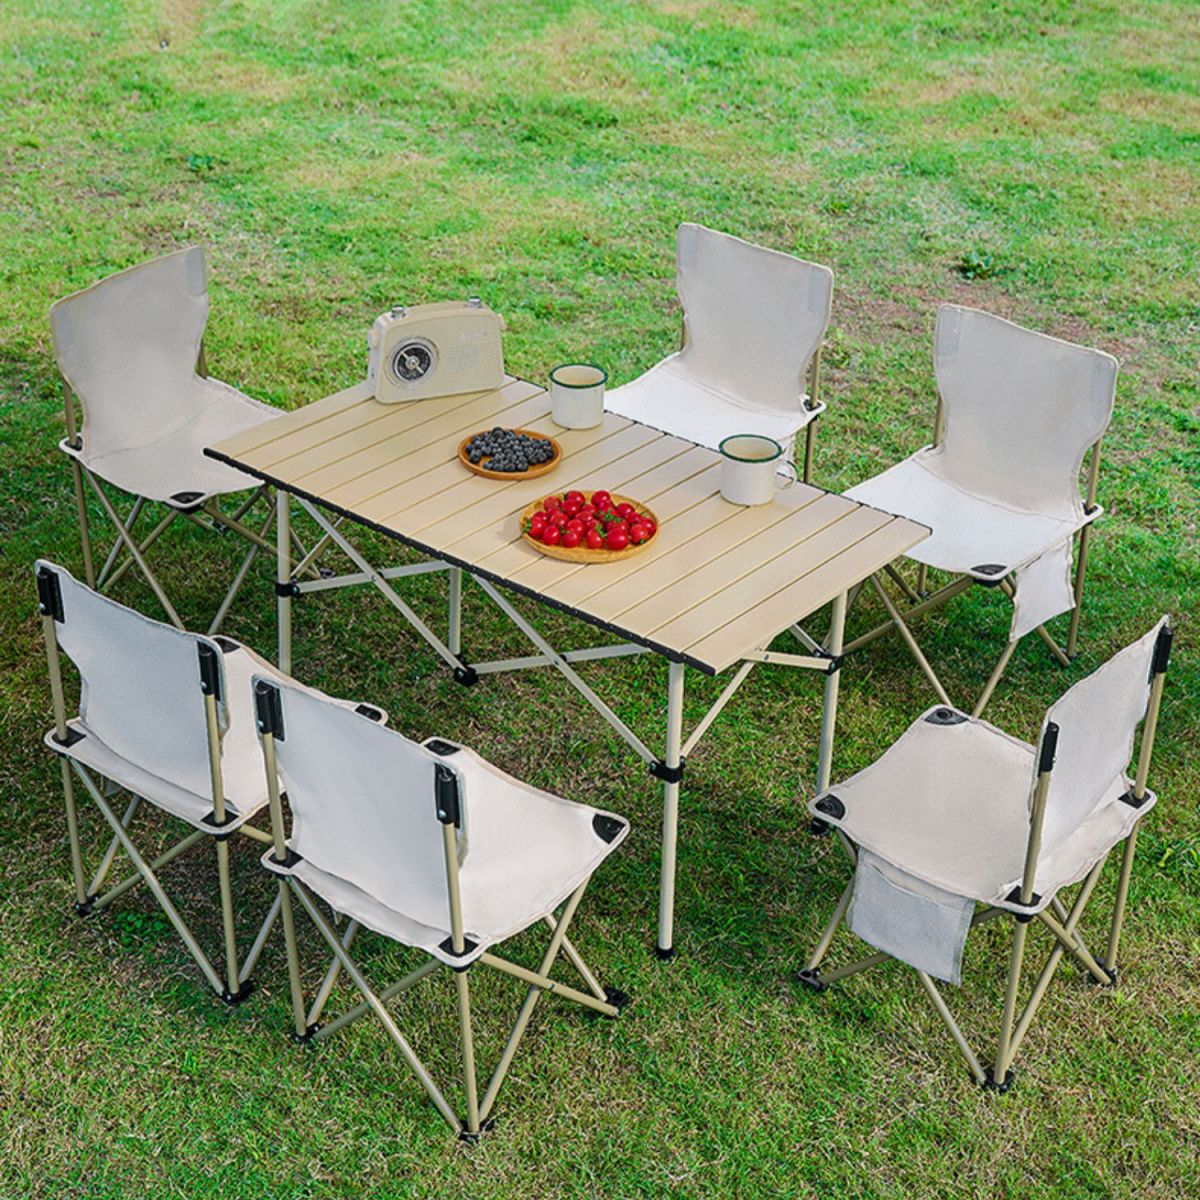 Industrial Steel Folding Table Outdoor 21.7"H Foldable Camping Table